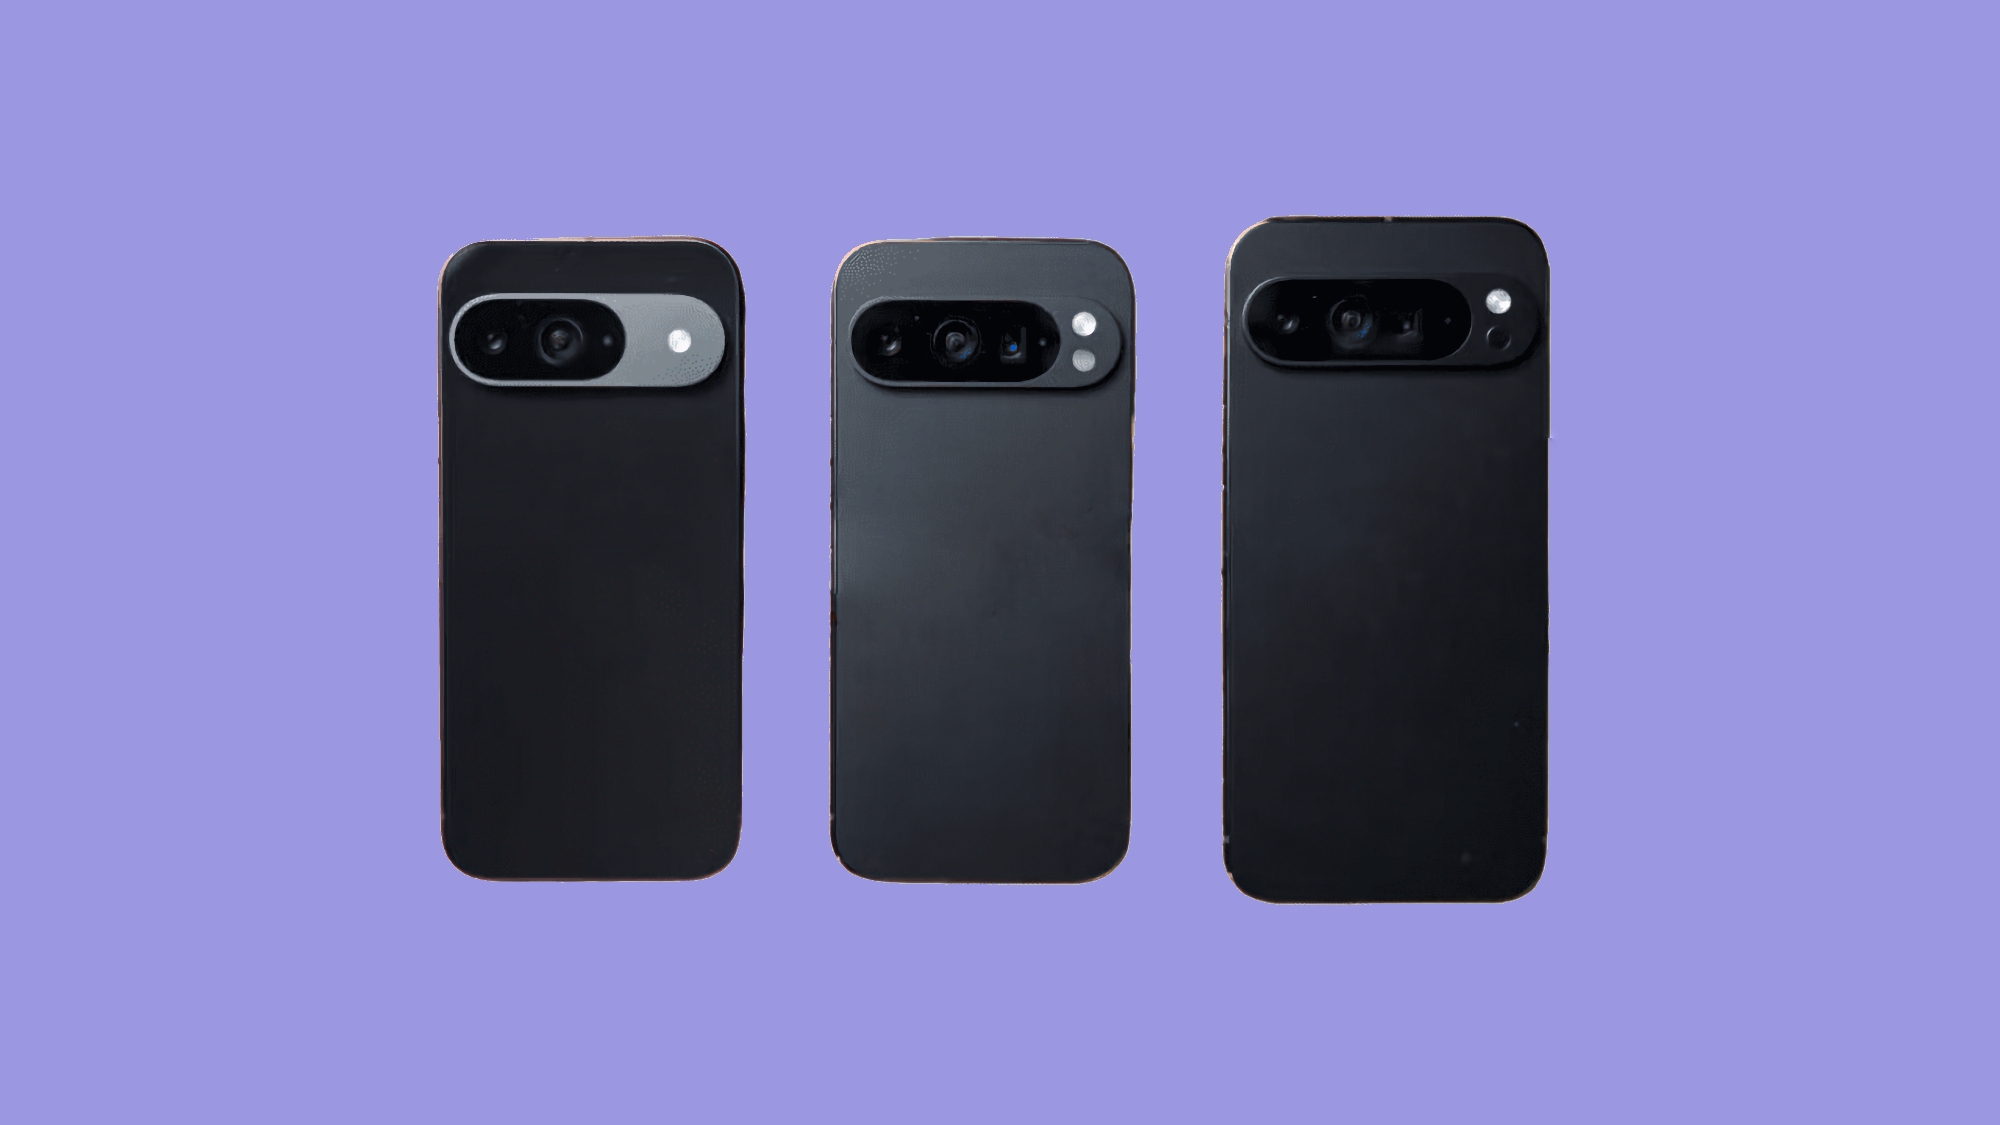 How much will the Google Pixel 9, Pixel 9 Pro, Pixel 9 Pro XL and Pixel 9 Pro Fold smartphones cost